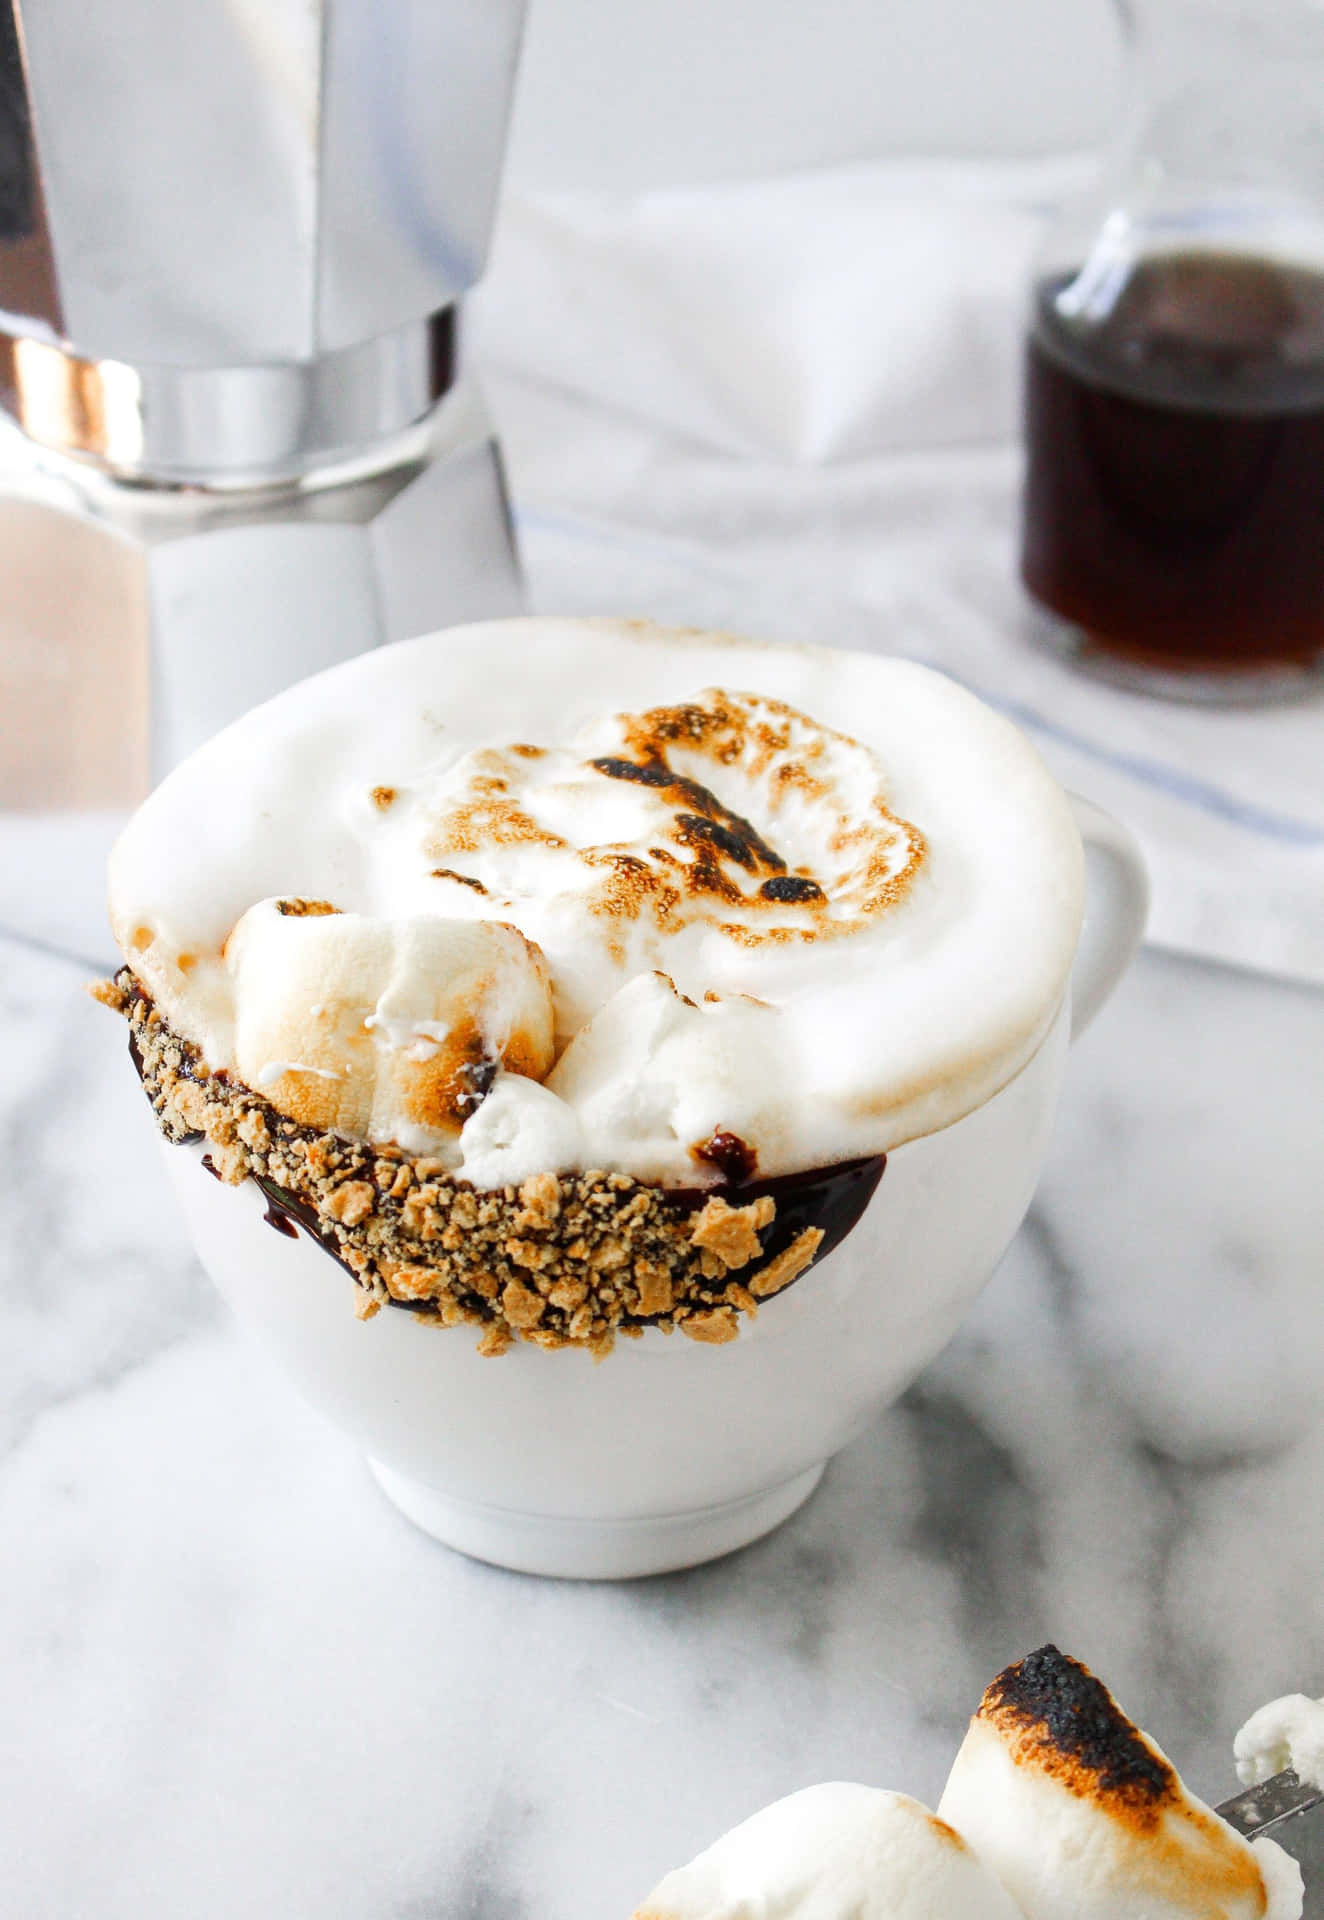 A Cup Of Coffee With A Smore On Top